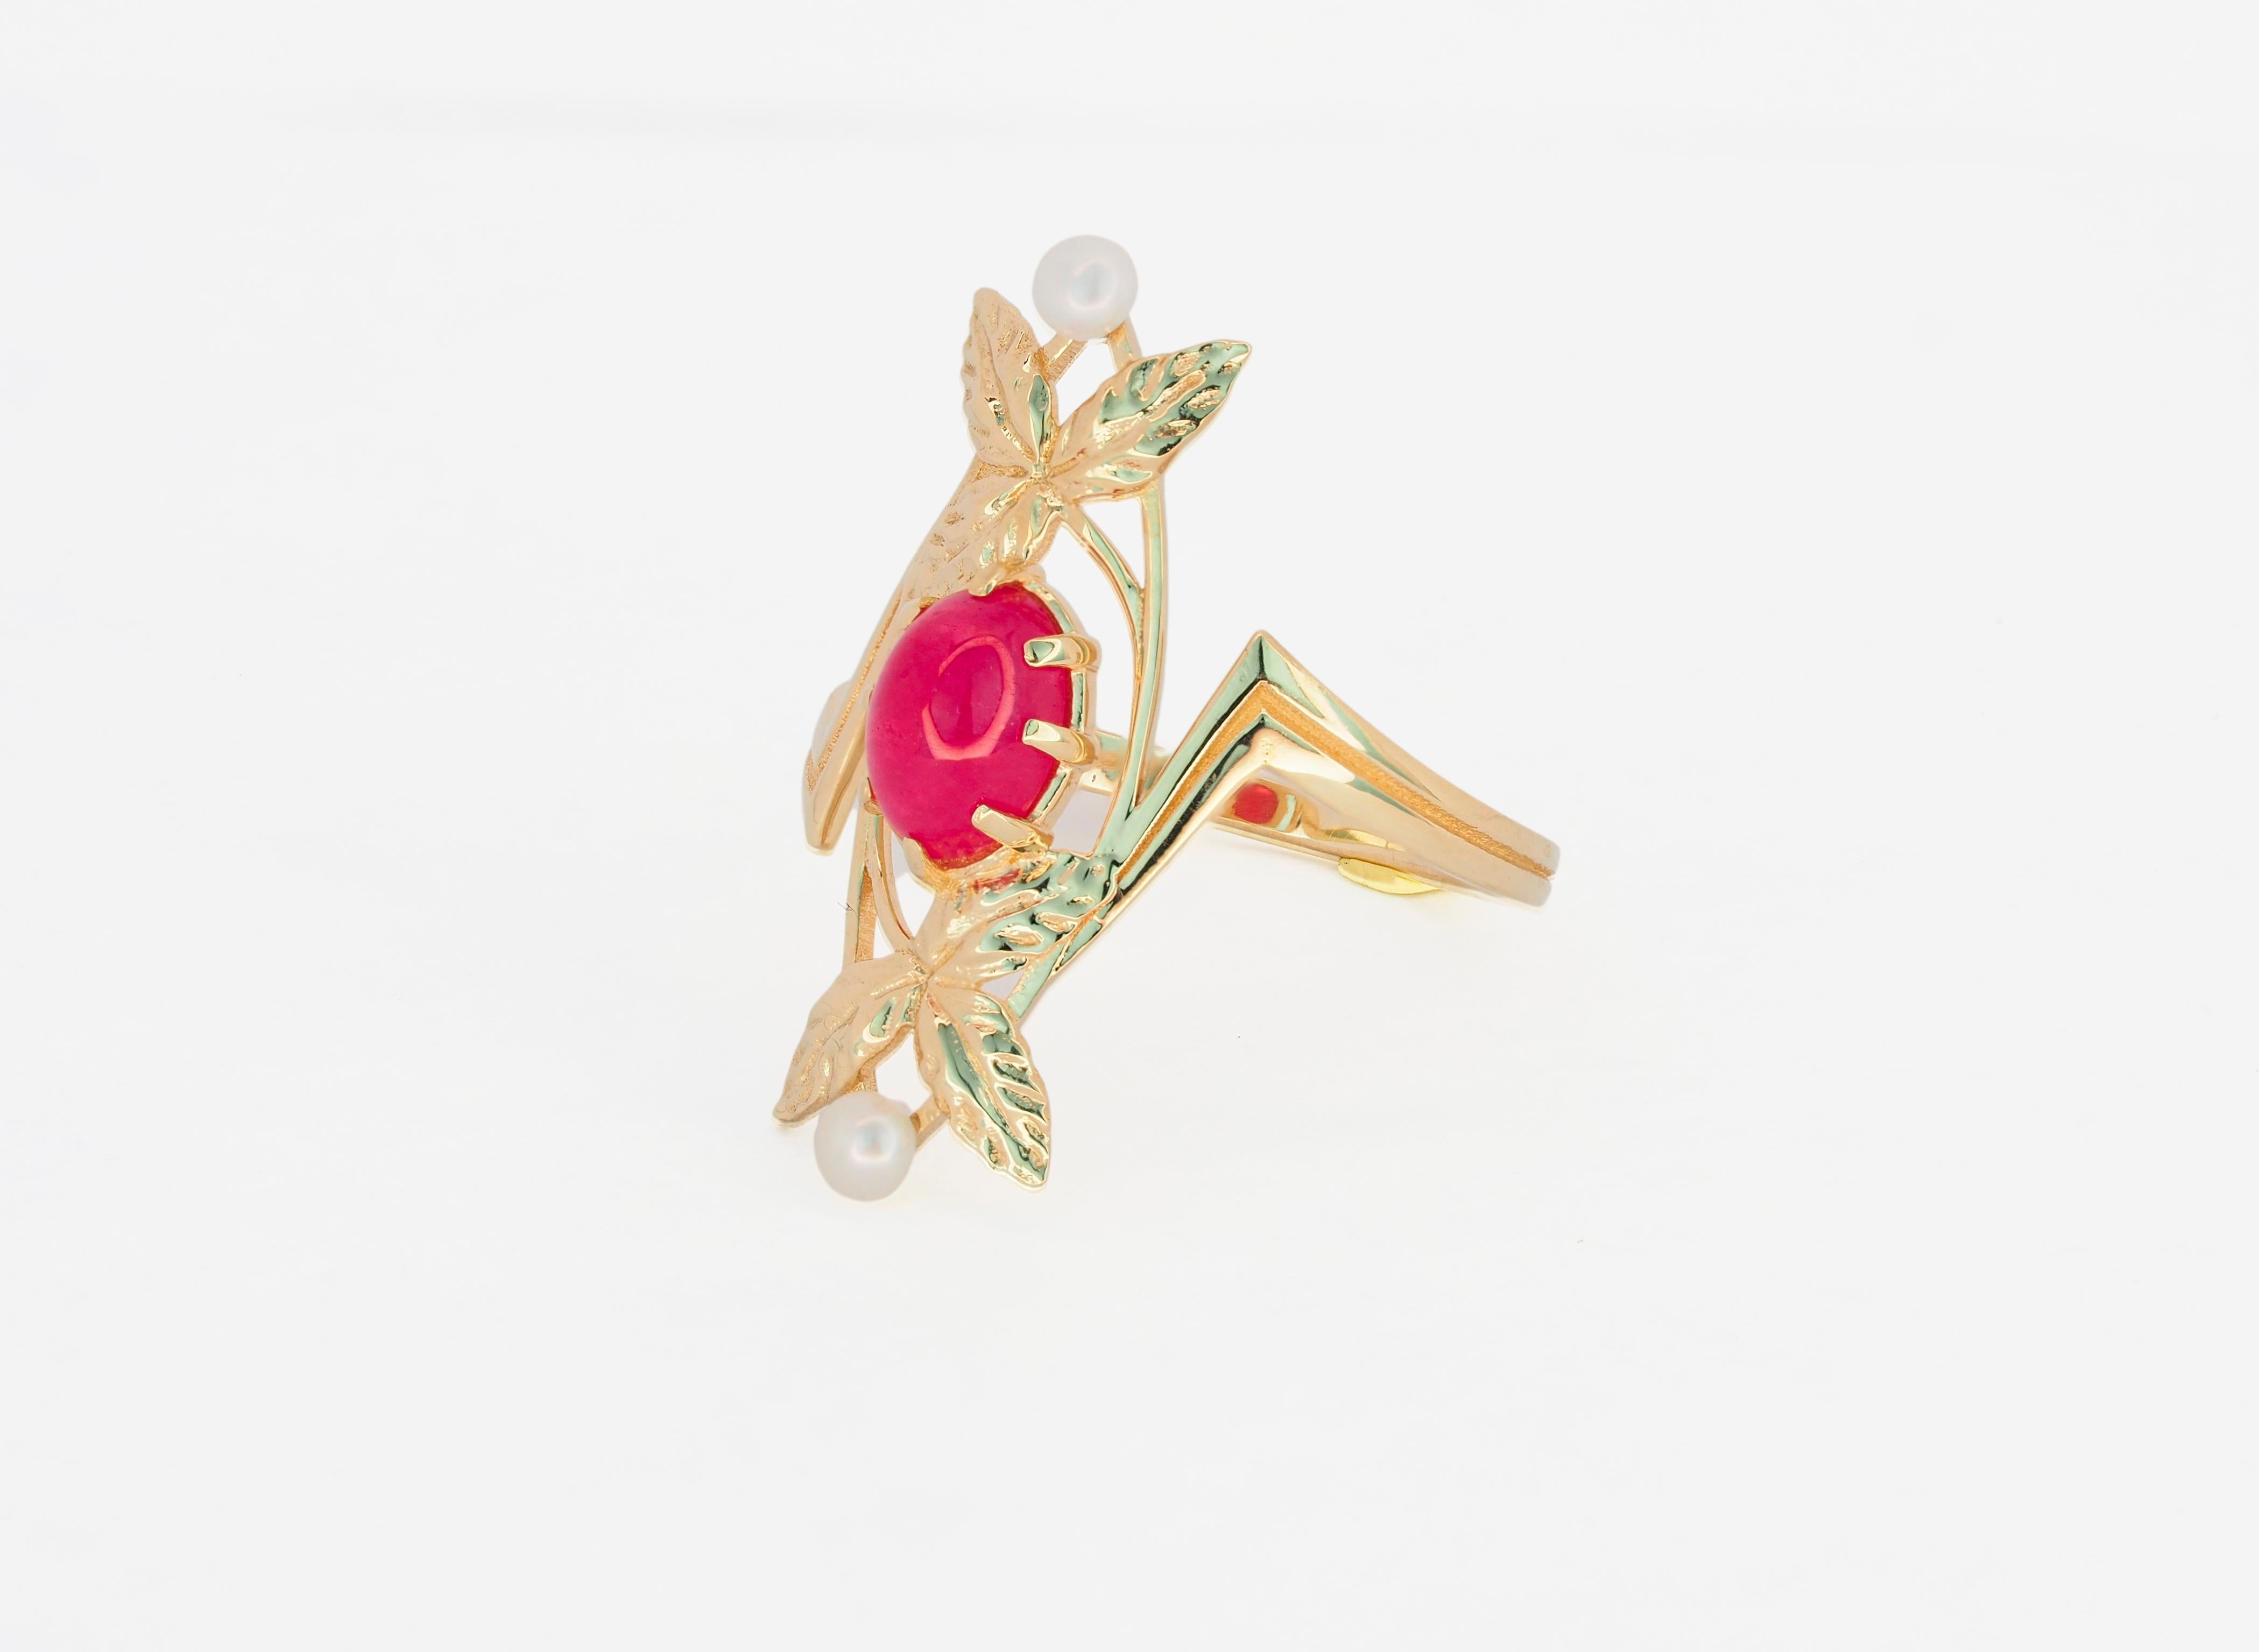 Cabochon 14k Gold Ring with Ruby and Pearls, Vintage Style Ring with Ruby